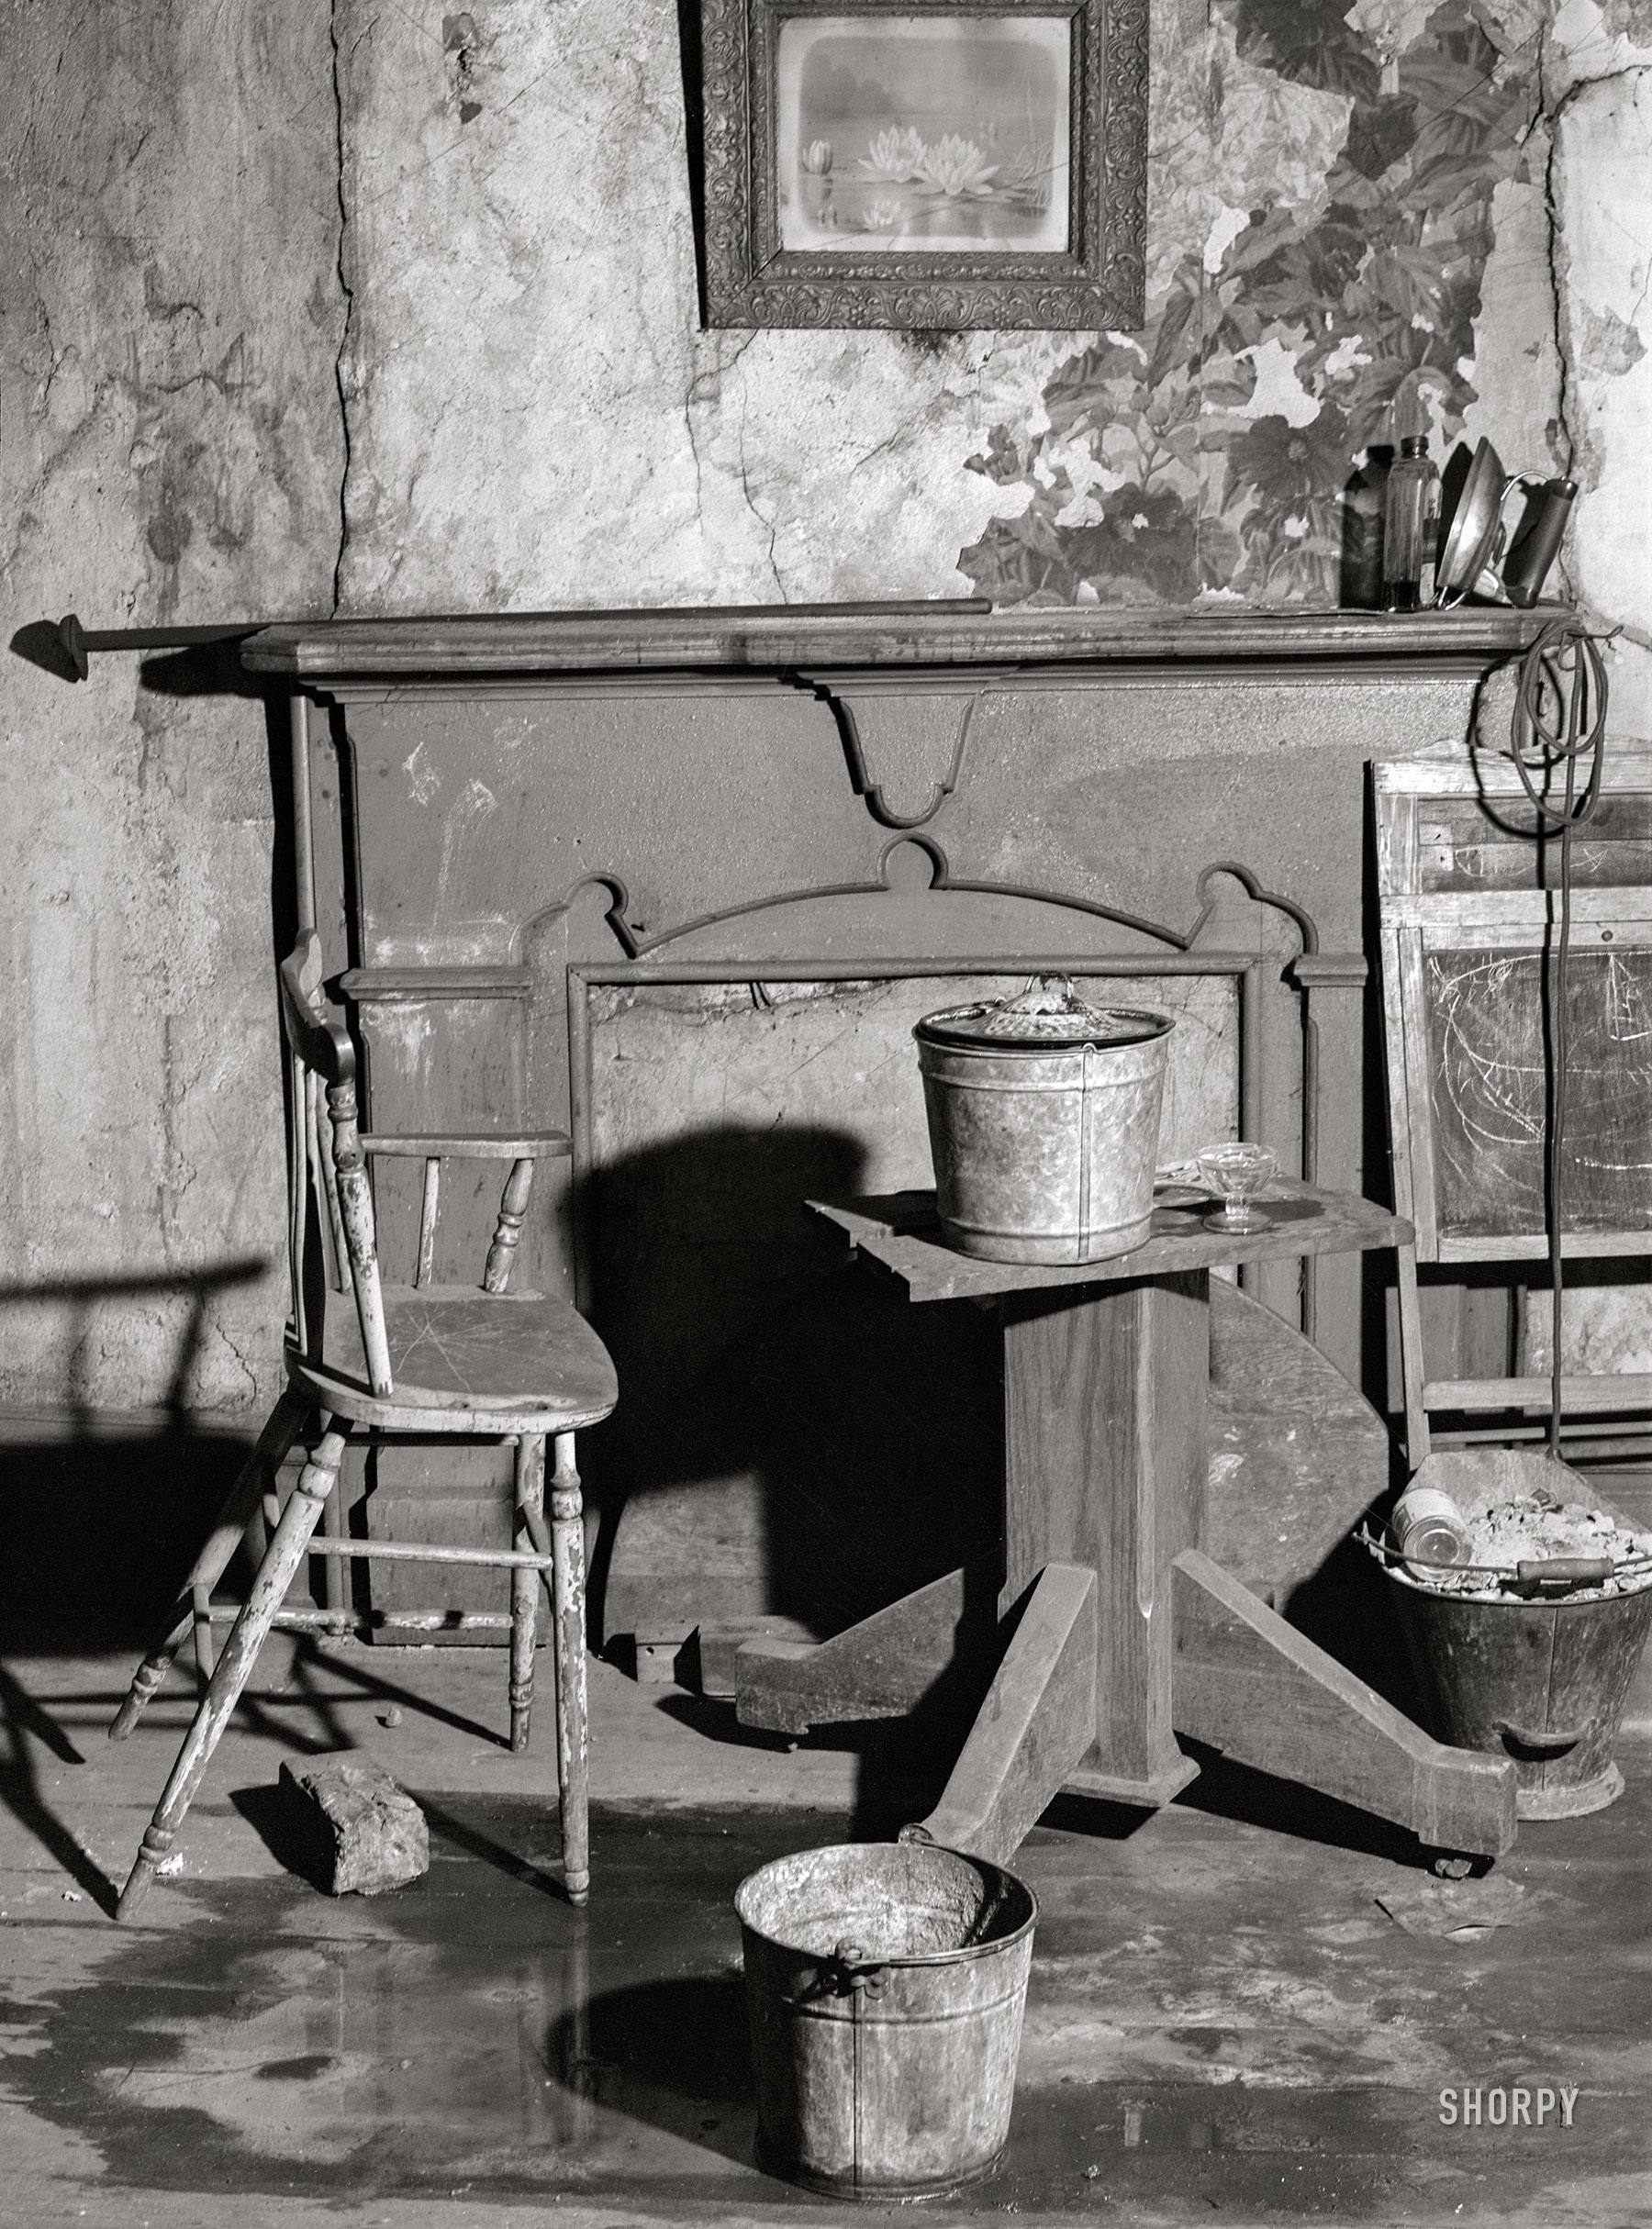 January 1940. "Buckets placed in room to catch water from leaky ceiling in a house in Mount Washington district. Beaver Falls, Pennsylvania." Photo by Jack Delano. View full size.